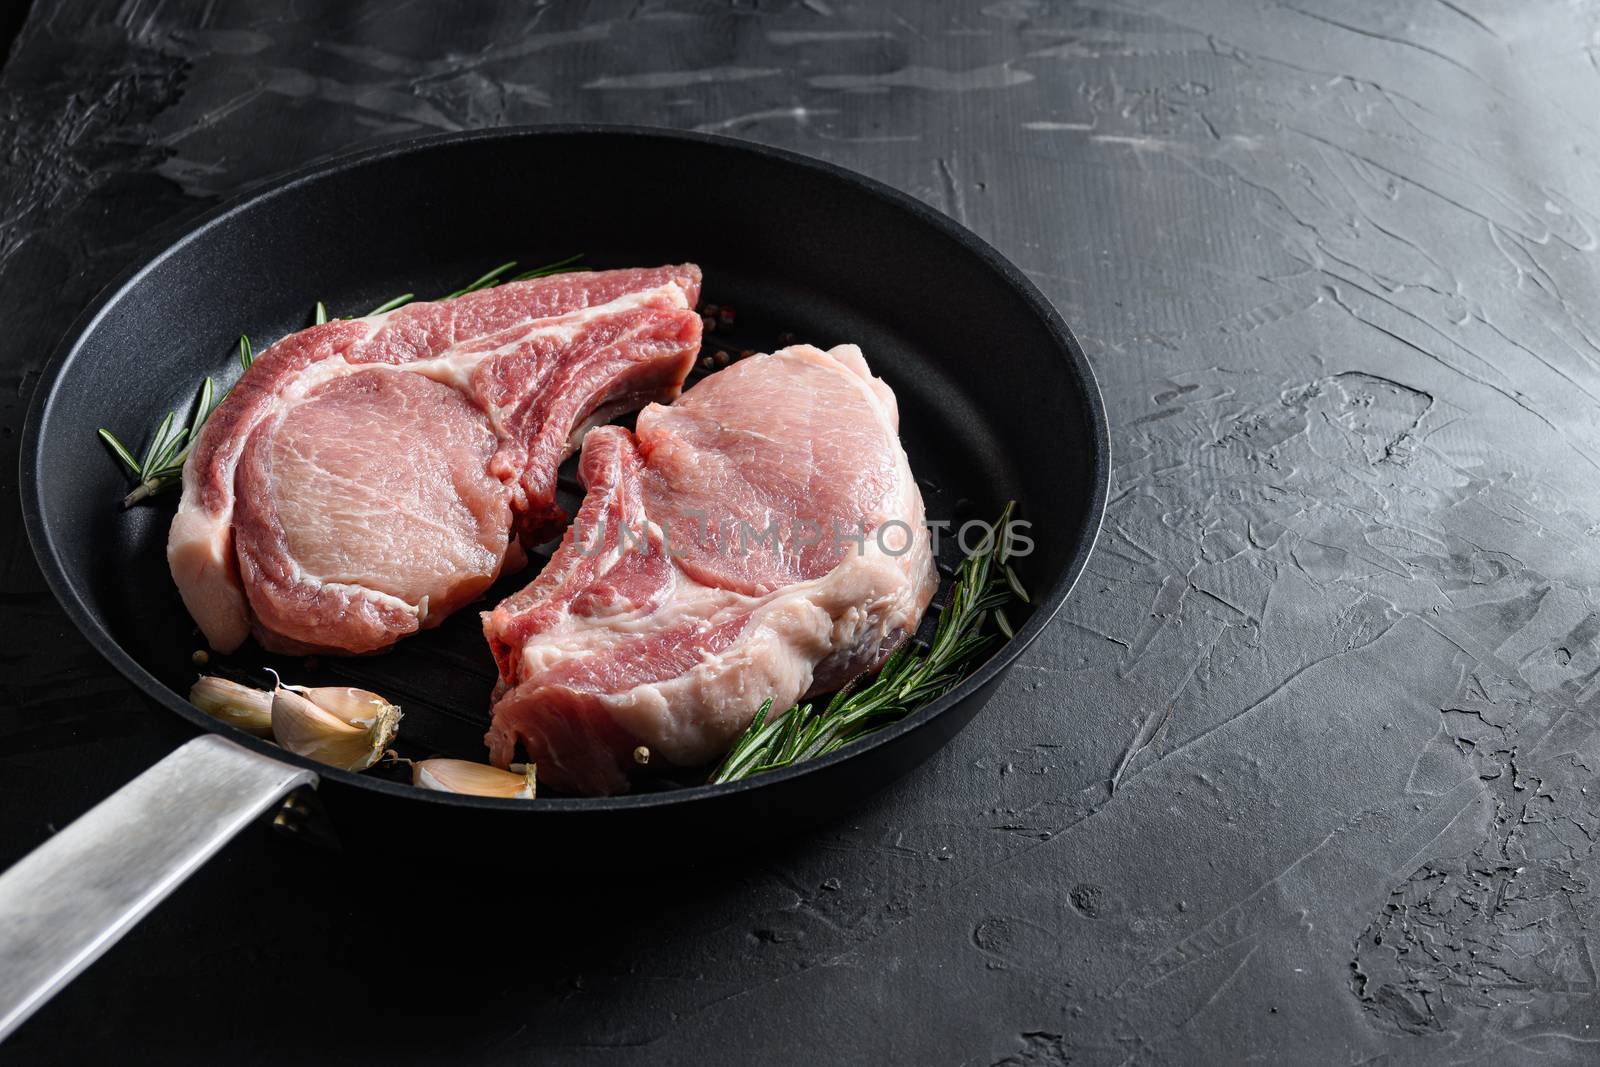 pork rib chops in frying pan grill skillet with herbs, spices side view black stone bakground space for text vertical by Ilianesolenyi